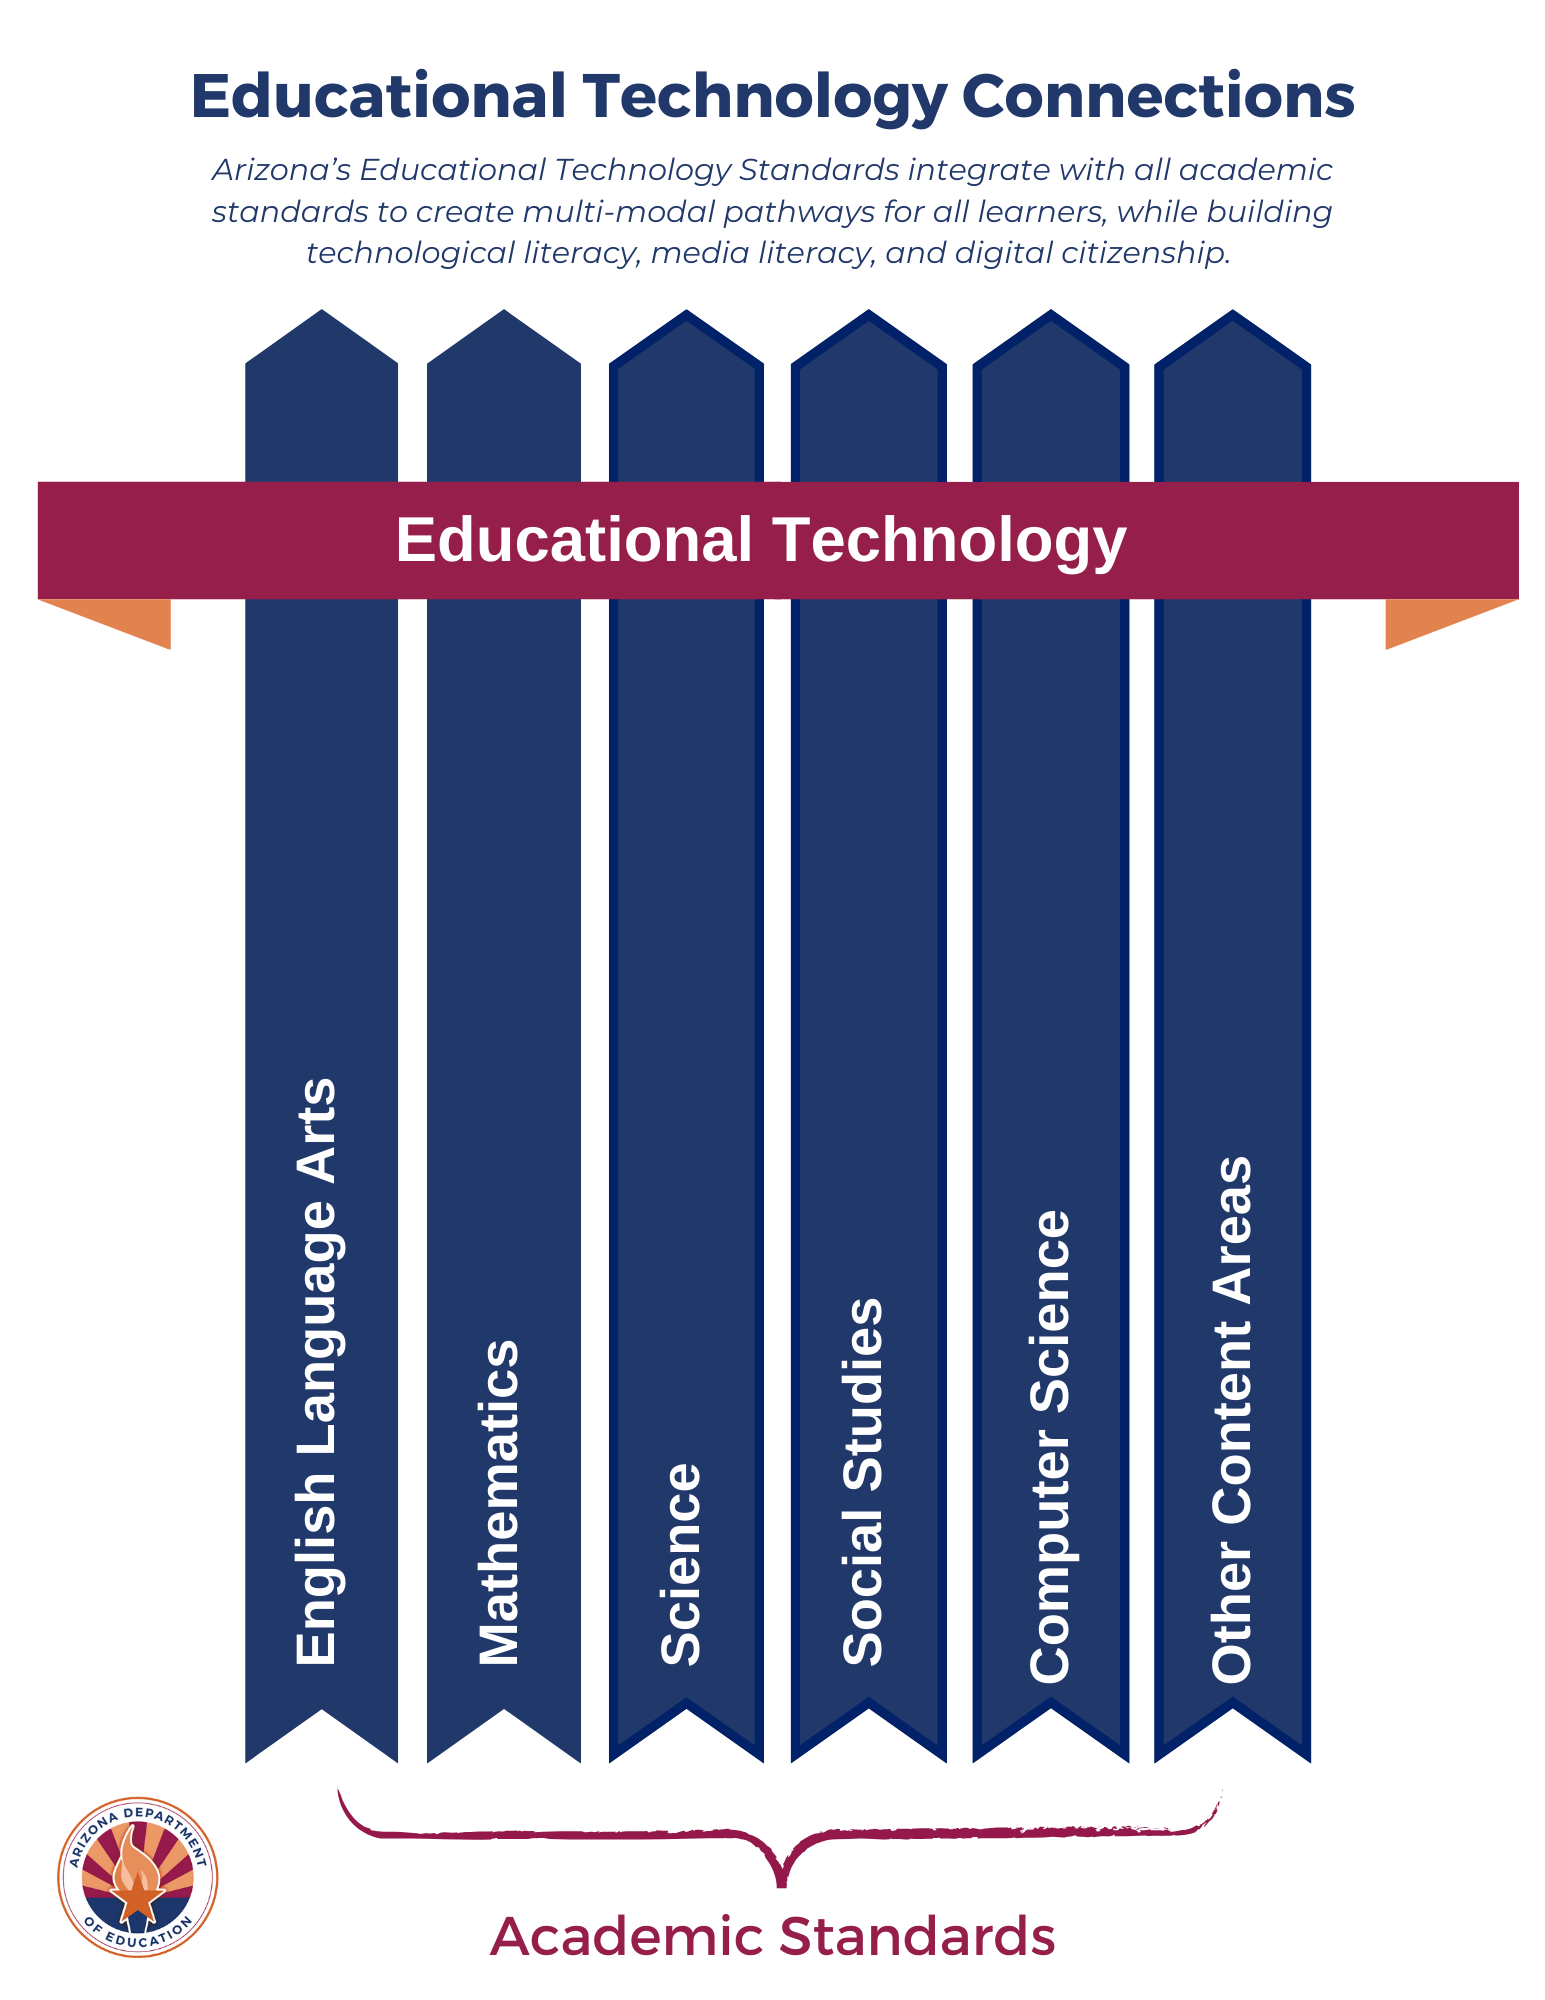 A decorative graphic that lists English Language Arts, Math, Science, Social Studies, and other content areas as multi-modal pathways that could be integrated with Educational Technology to build technological, media, and digital literacy. 